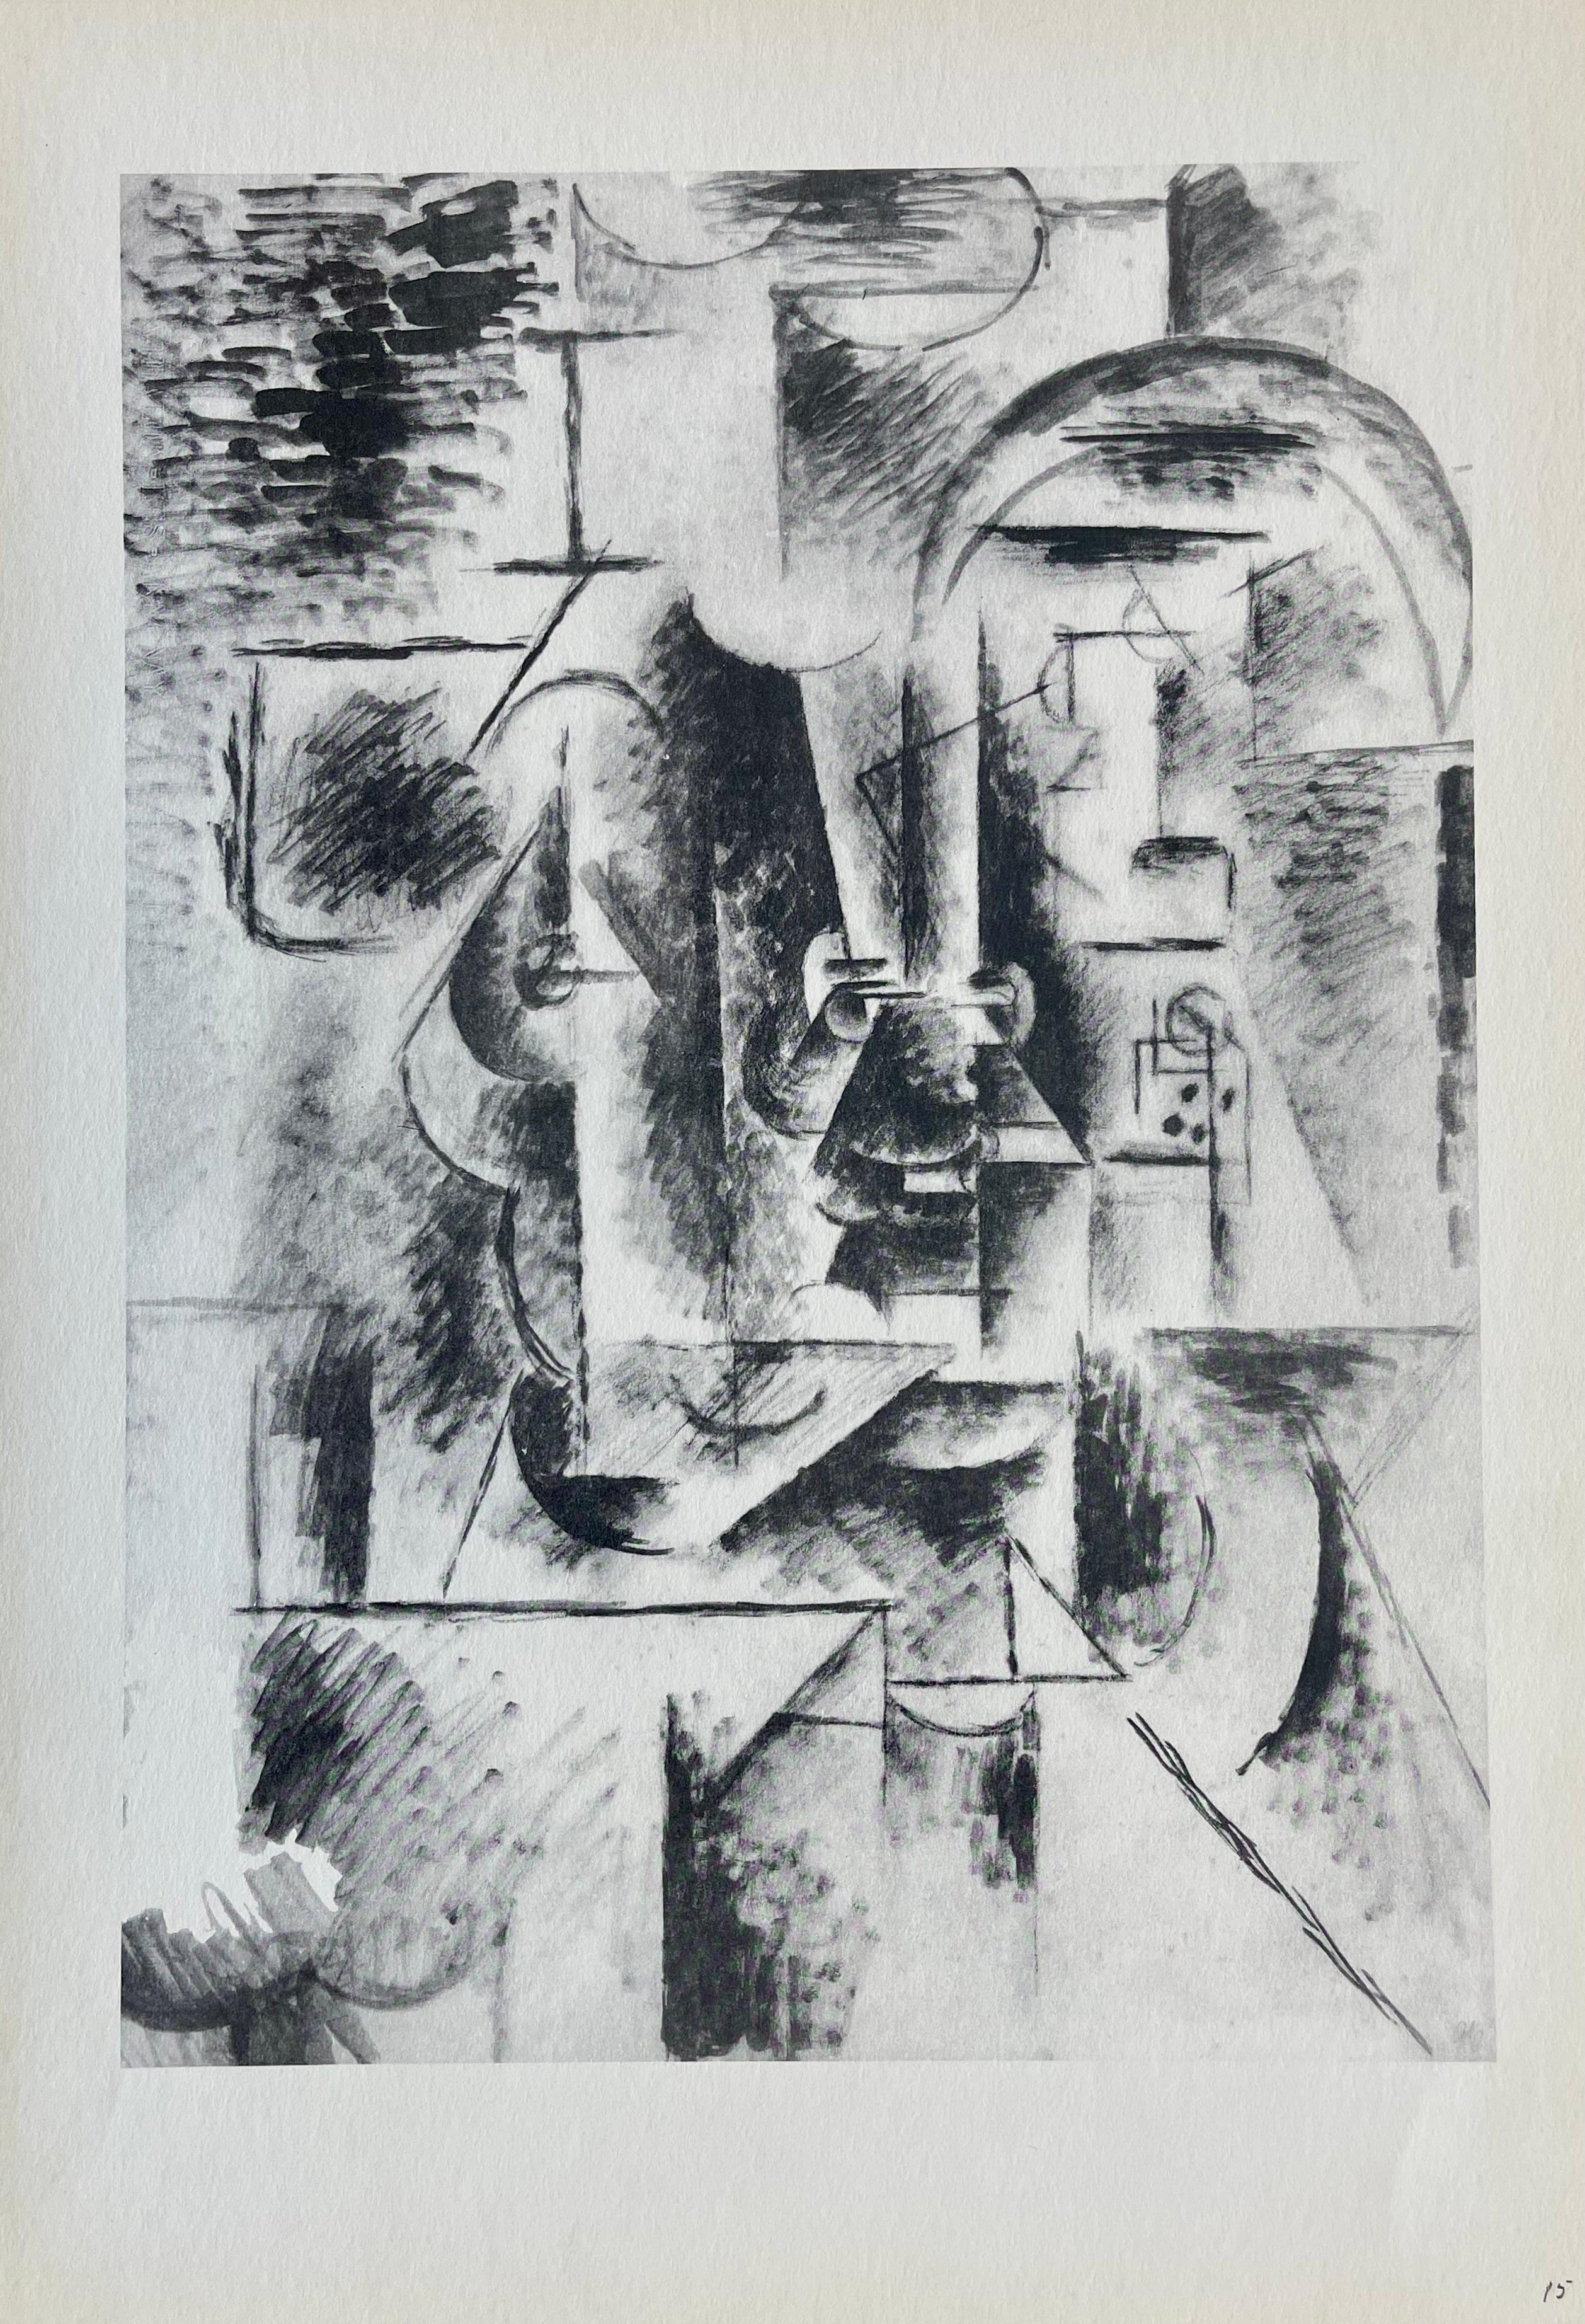 Lithograph on wove paper.  Unsigned and unnumbered, as issued. Good Condition; never framed or matted. Notes: From the folio, Picasso: Fifteen Drawings, 1946. Published by Pantheon Books, Inc., New York; rendered and printed by Albert Carman, City